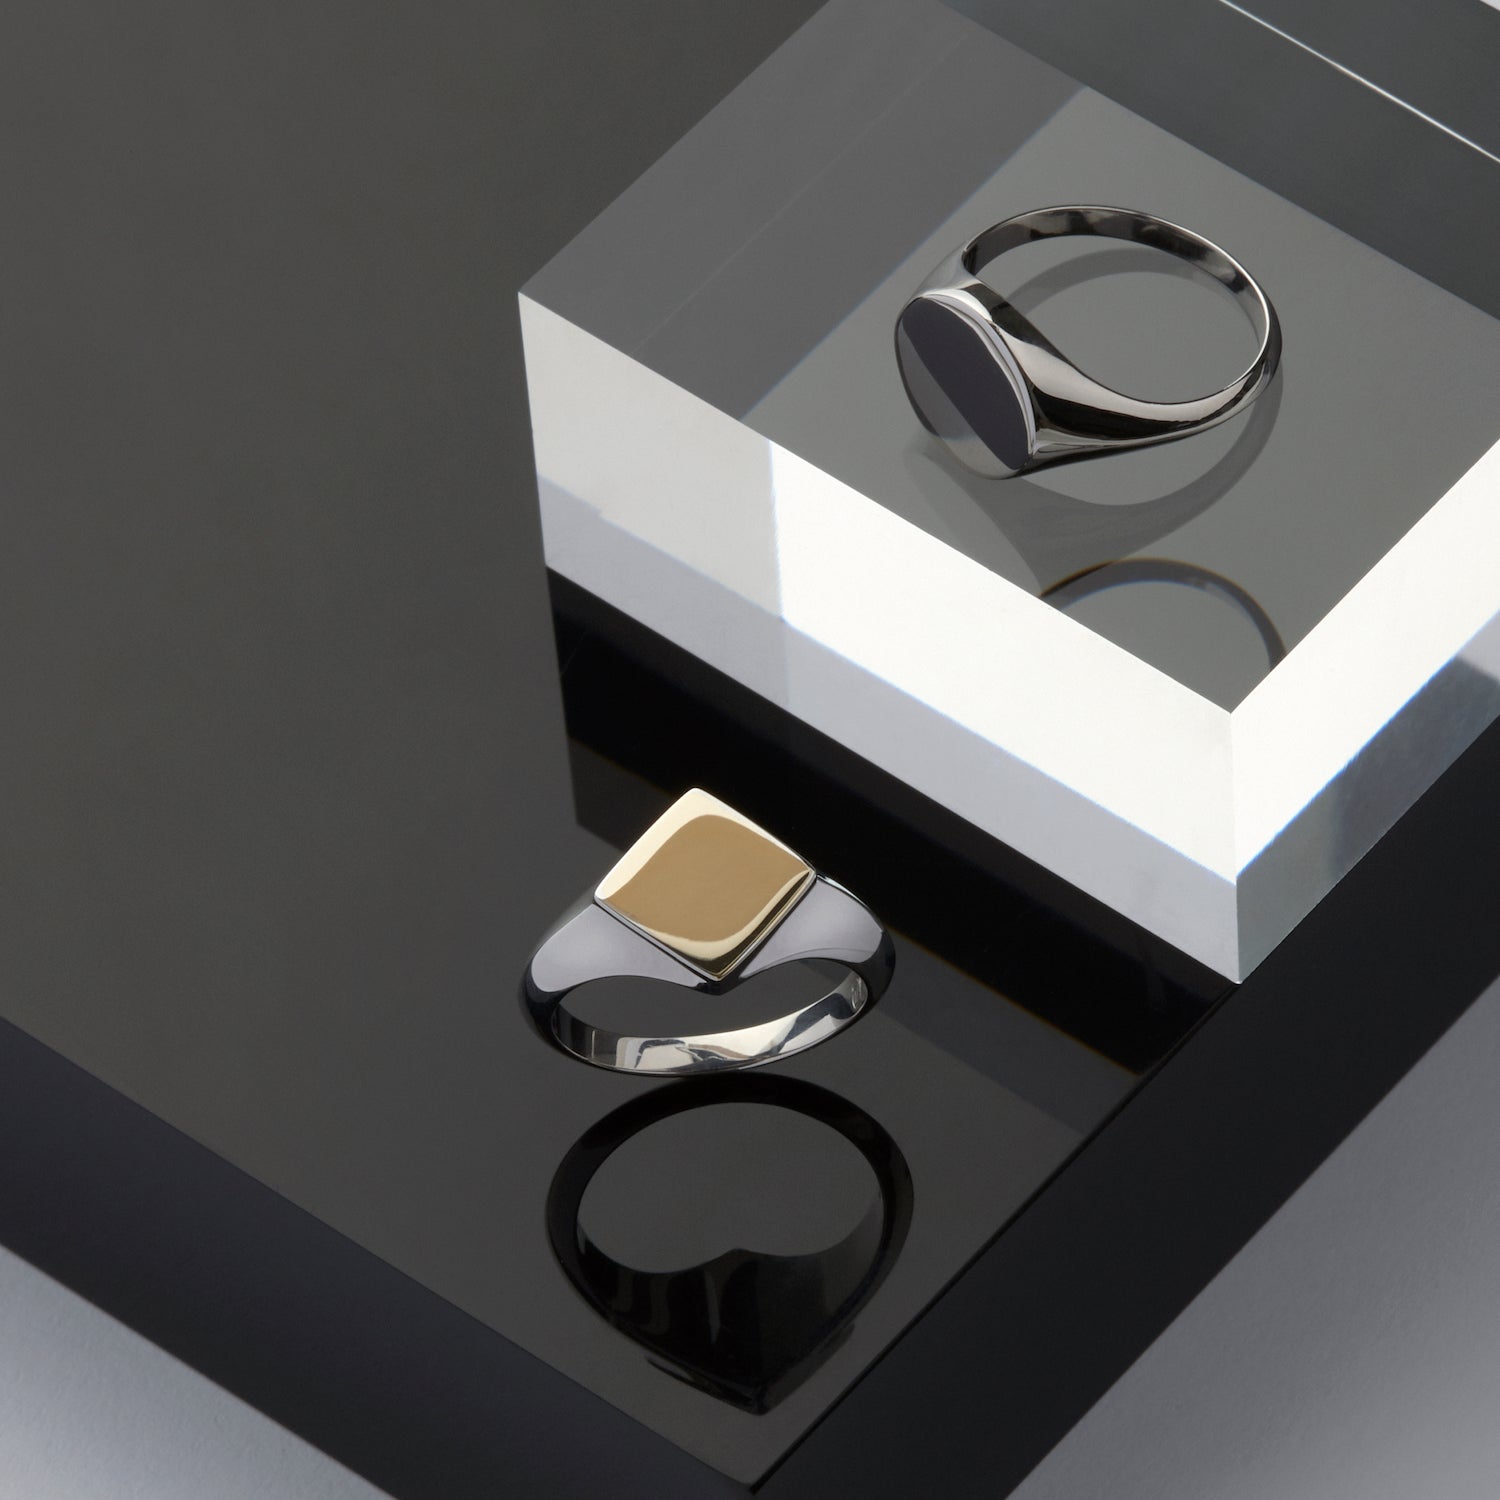 Rhembo Signet Ring. 9ct Yellow Gold & Sterling Silver - MONARC CONCIERGE